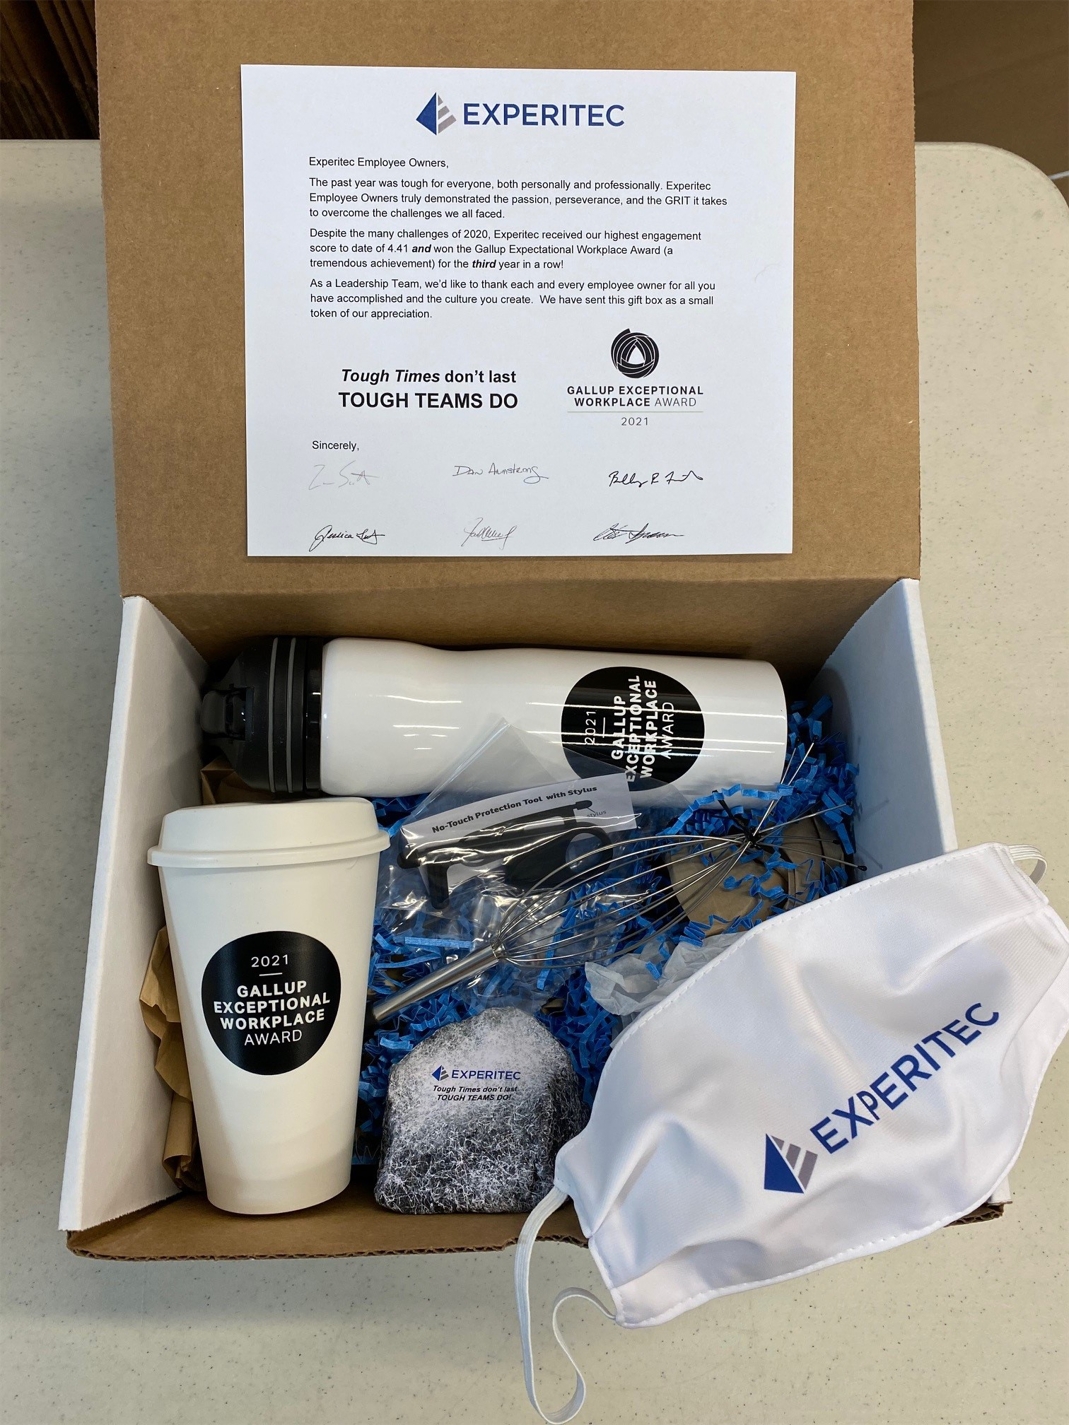 The Experitec Leadership Team recognized Employee Owners on this year’s Employee Appreciation Day by sending gift boxes with Experitec merchandise to their homes.